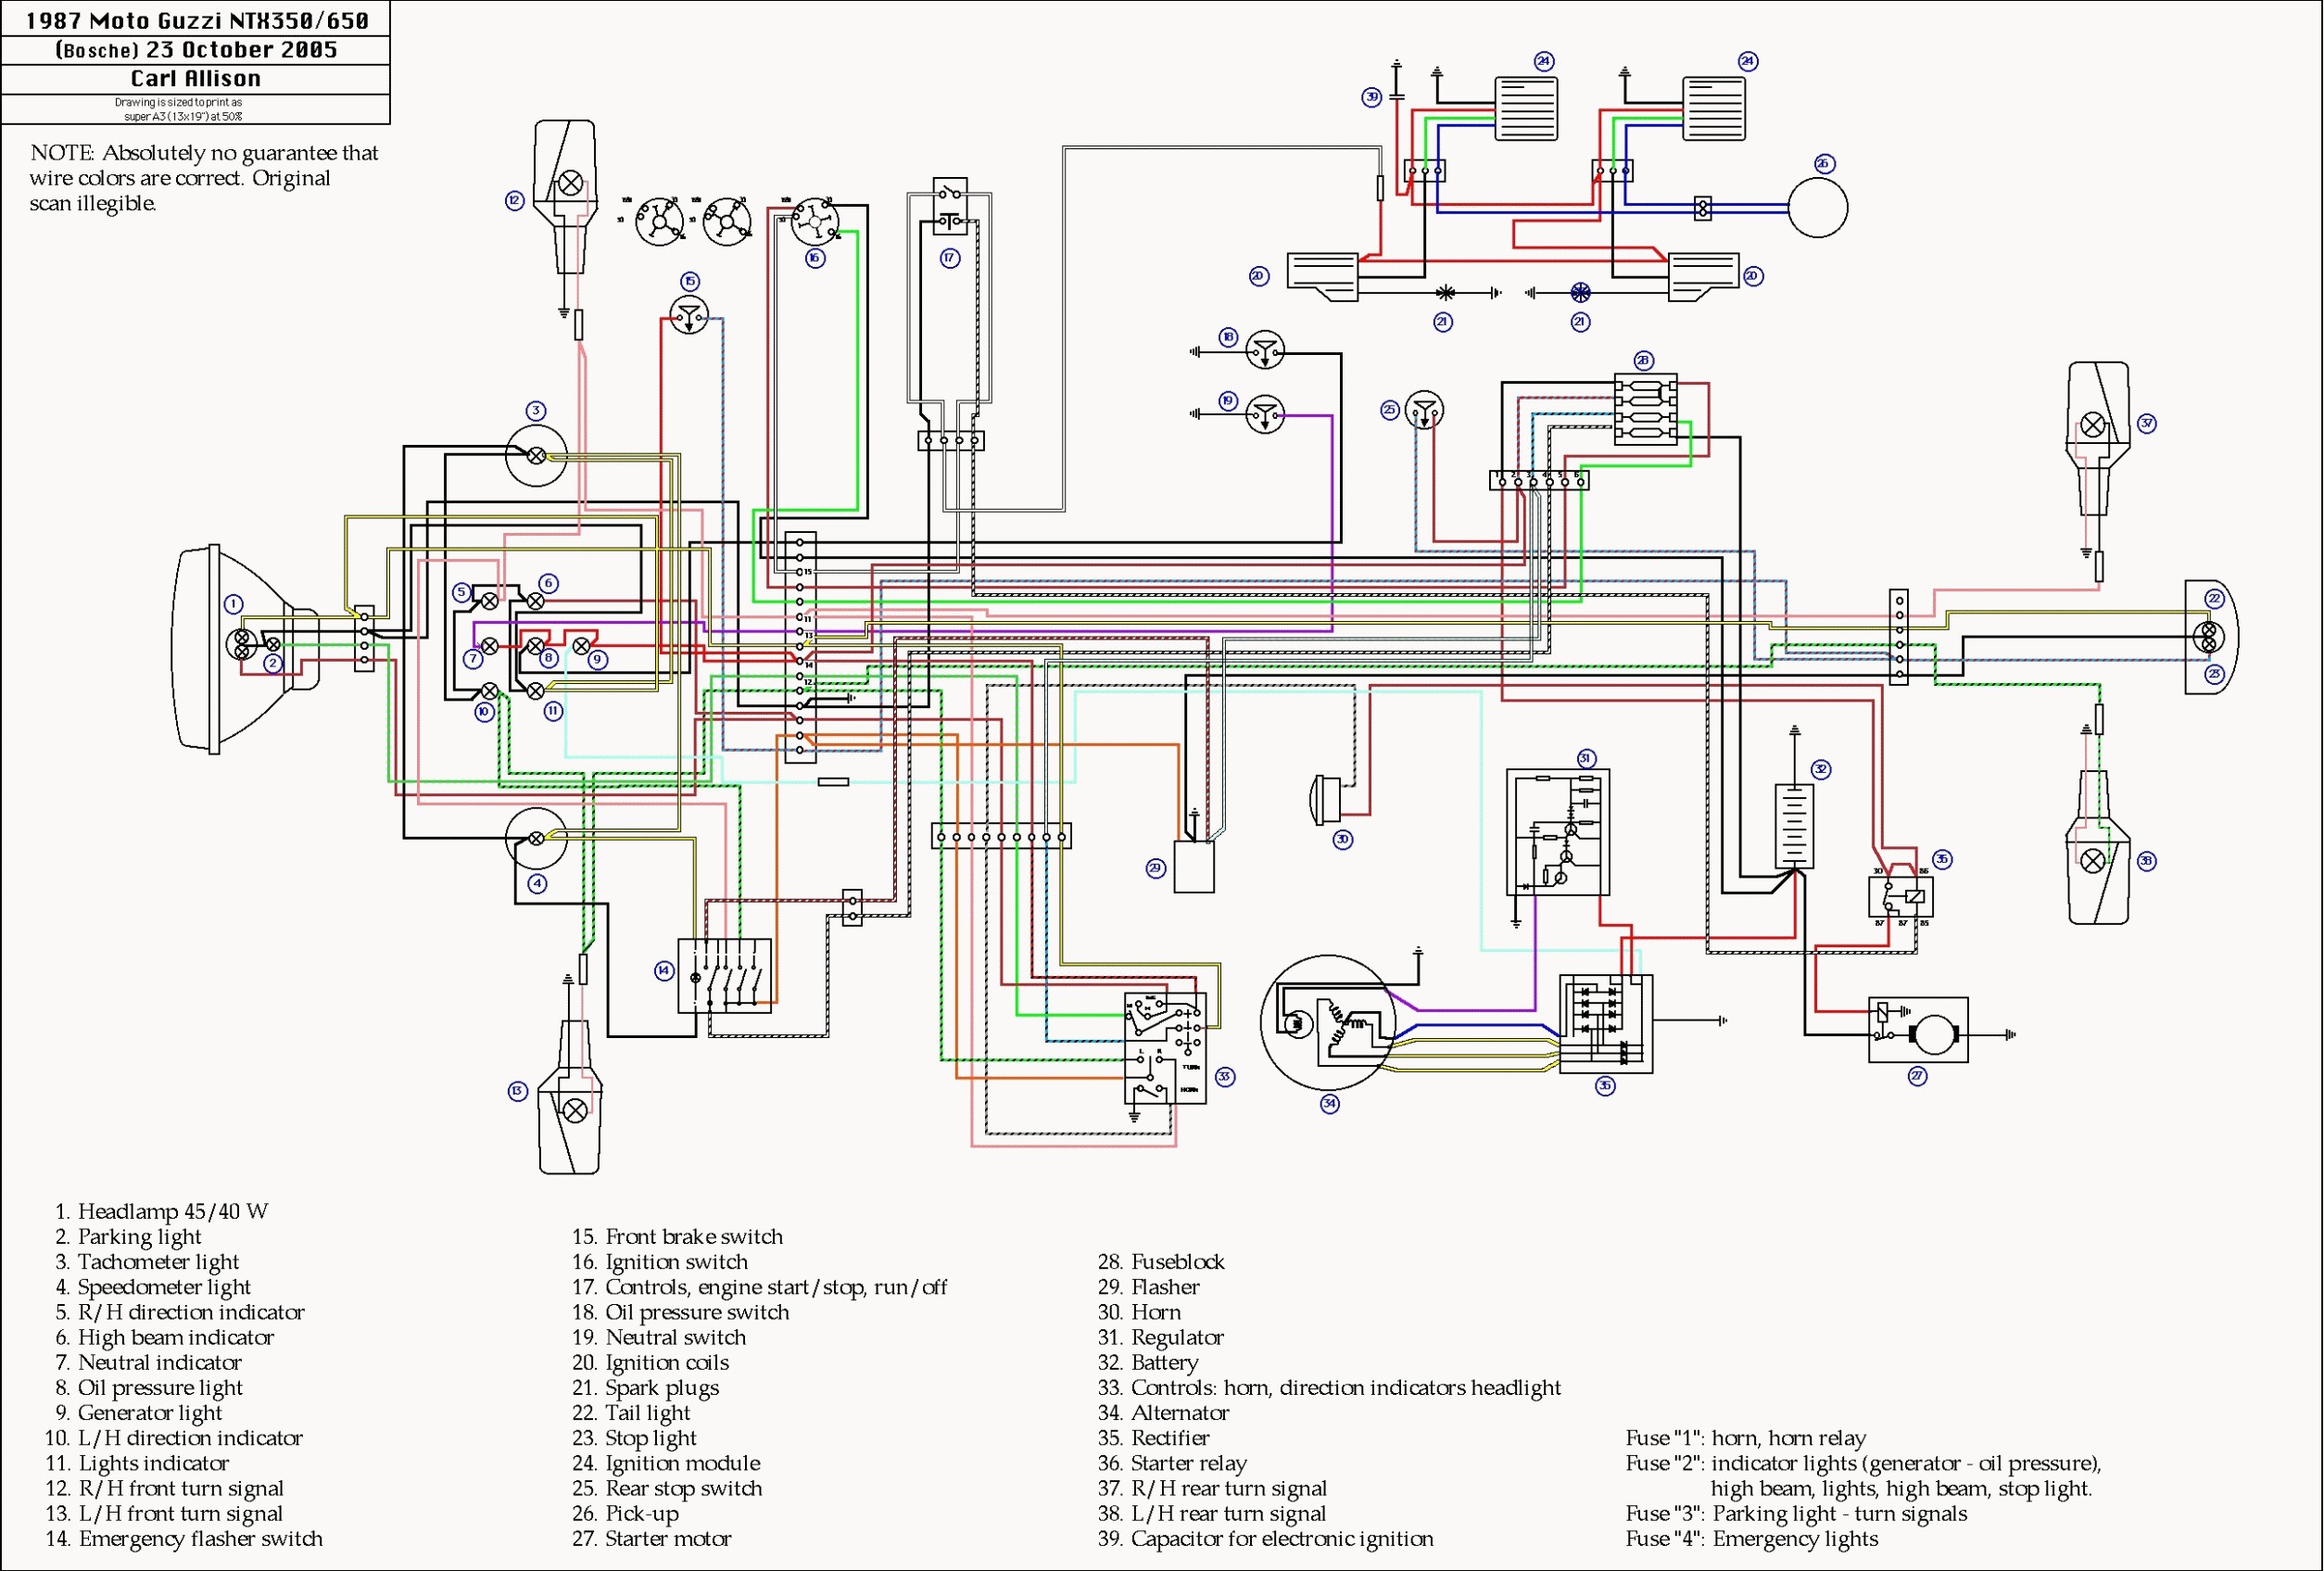 Where Can I Find Full Engine Diagram for My Car Yamaha Rs 4 Engine Diagram Download In 2020